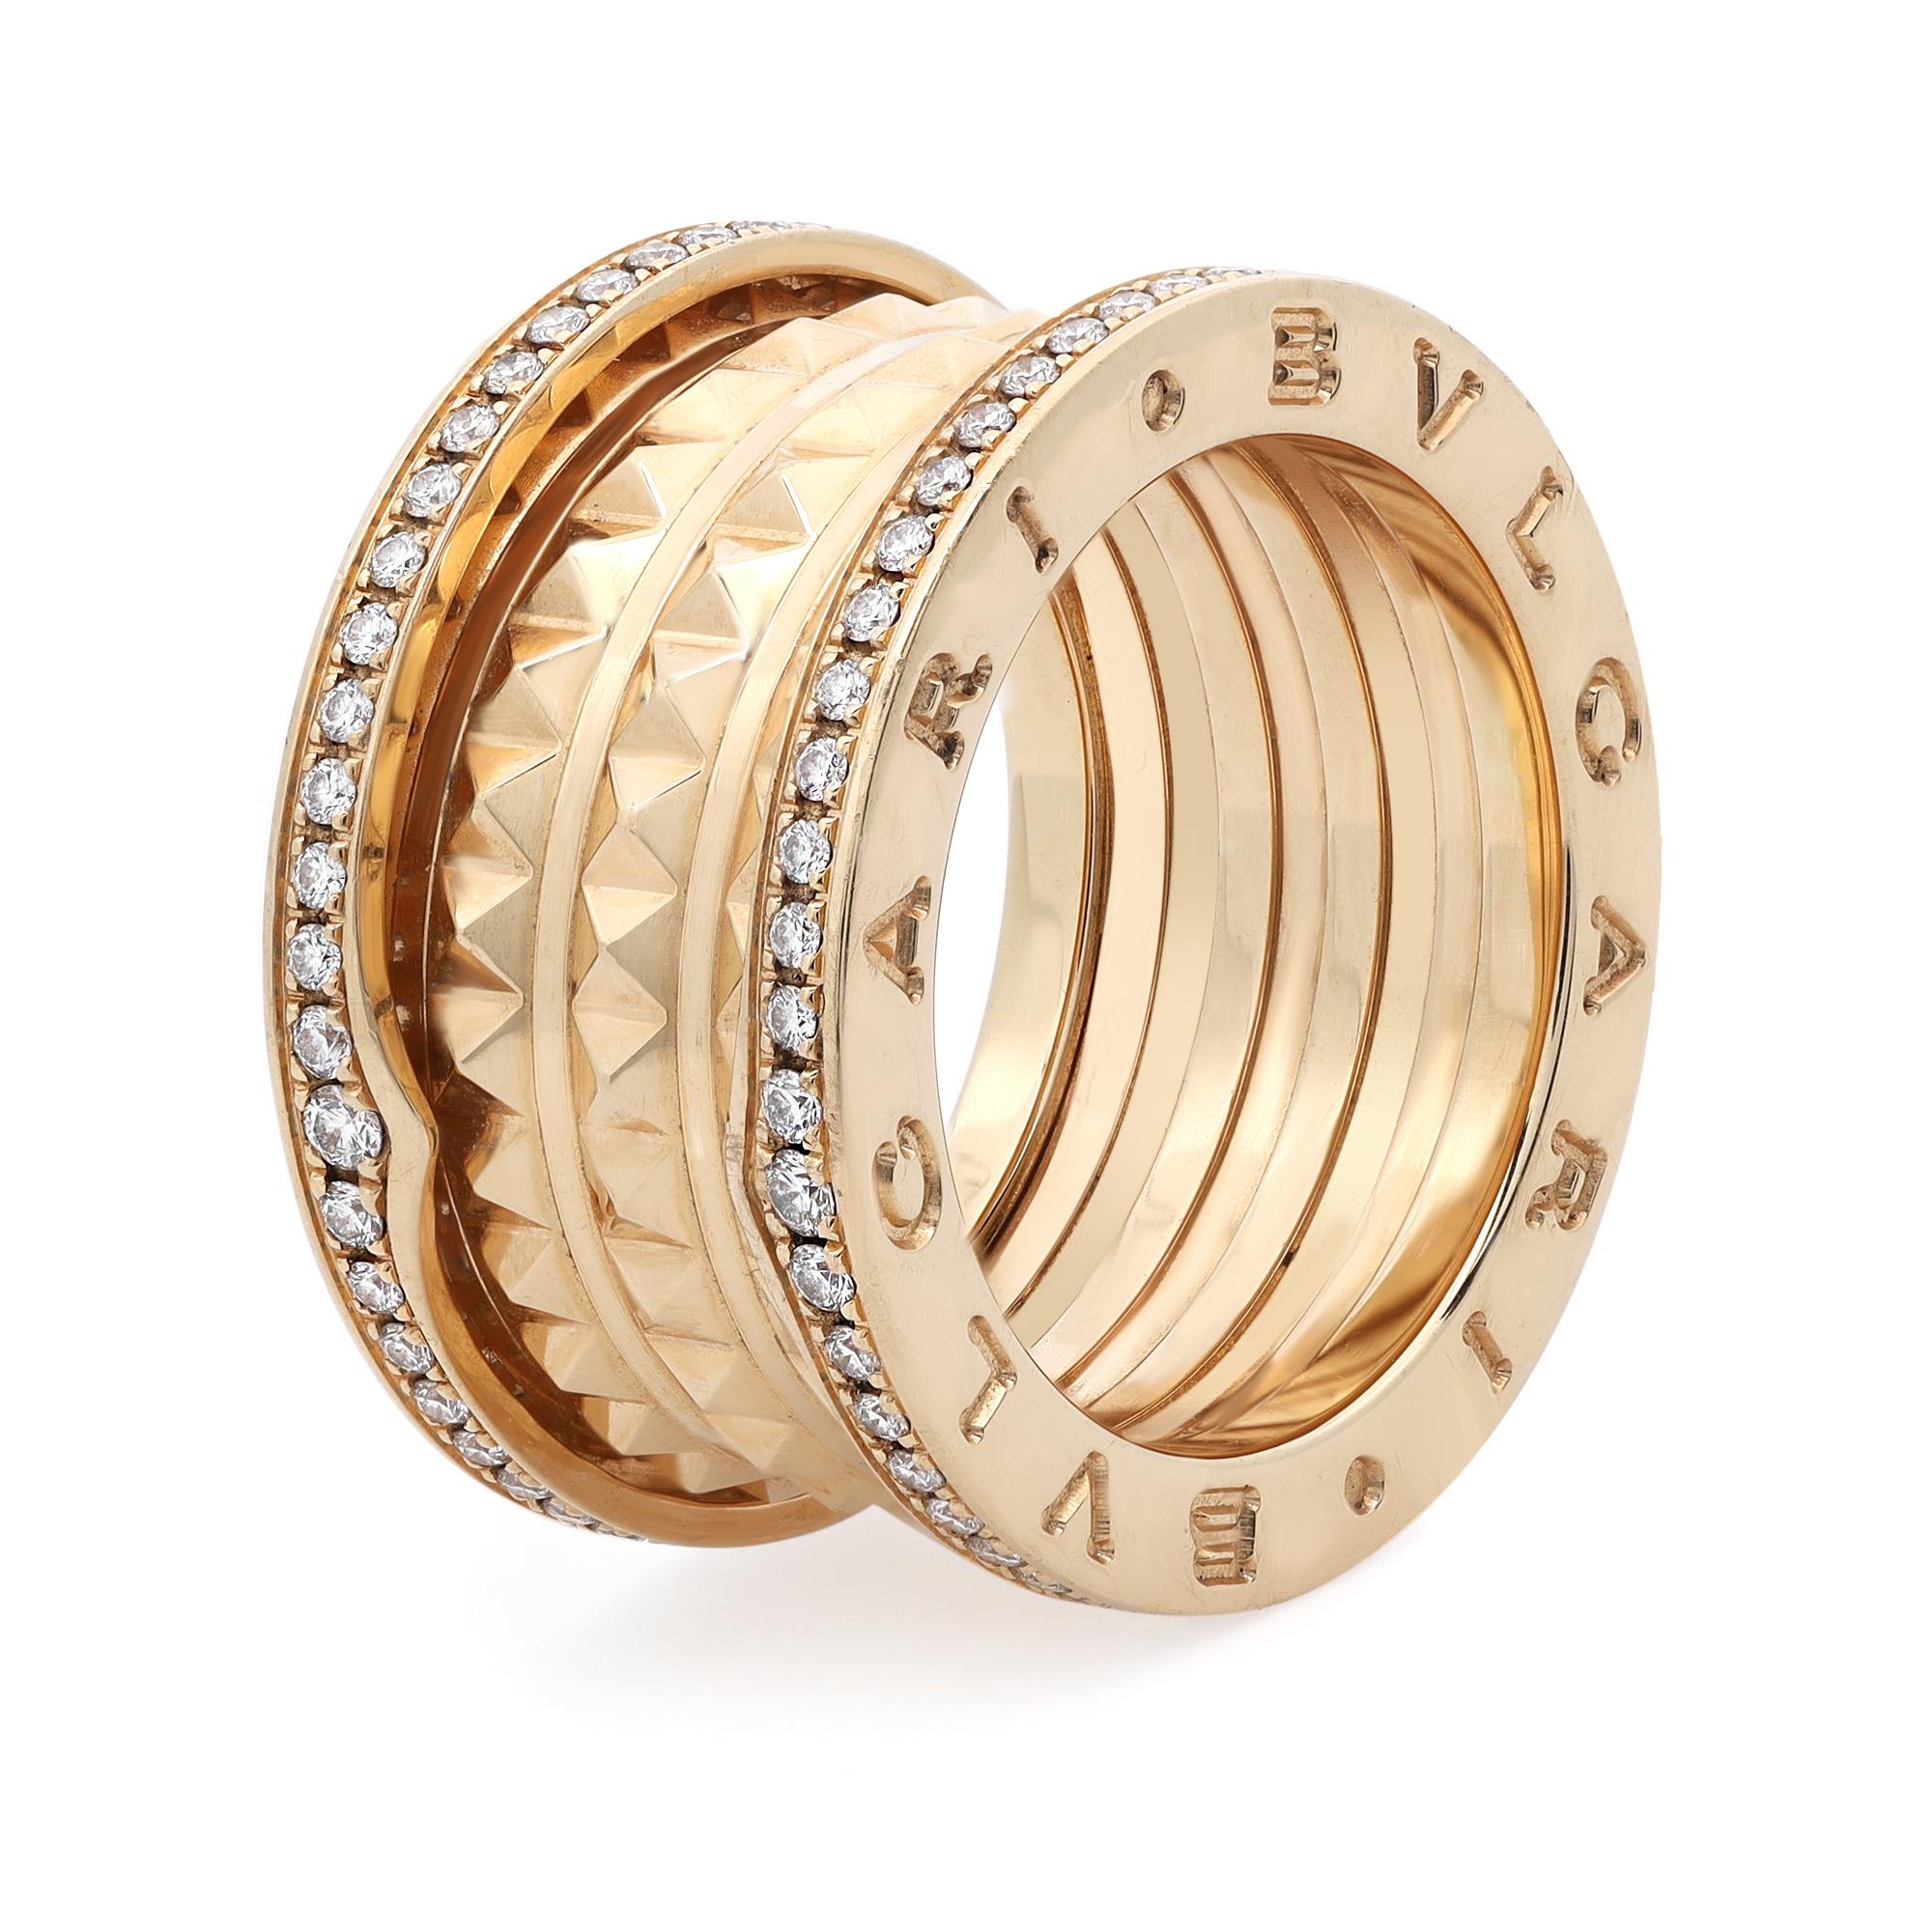 Bvlgari B Zero 1 Rock four band ring. Crafted in 18k yellow gold with studded spiral and pave diamonds on the edges. Ring size: 52 US 6. Runs small because of the thickness and width of the ring. Total diamond weight 0.50 carats. Made in Italy.